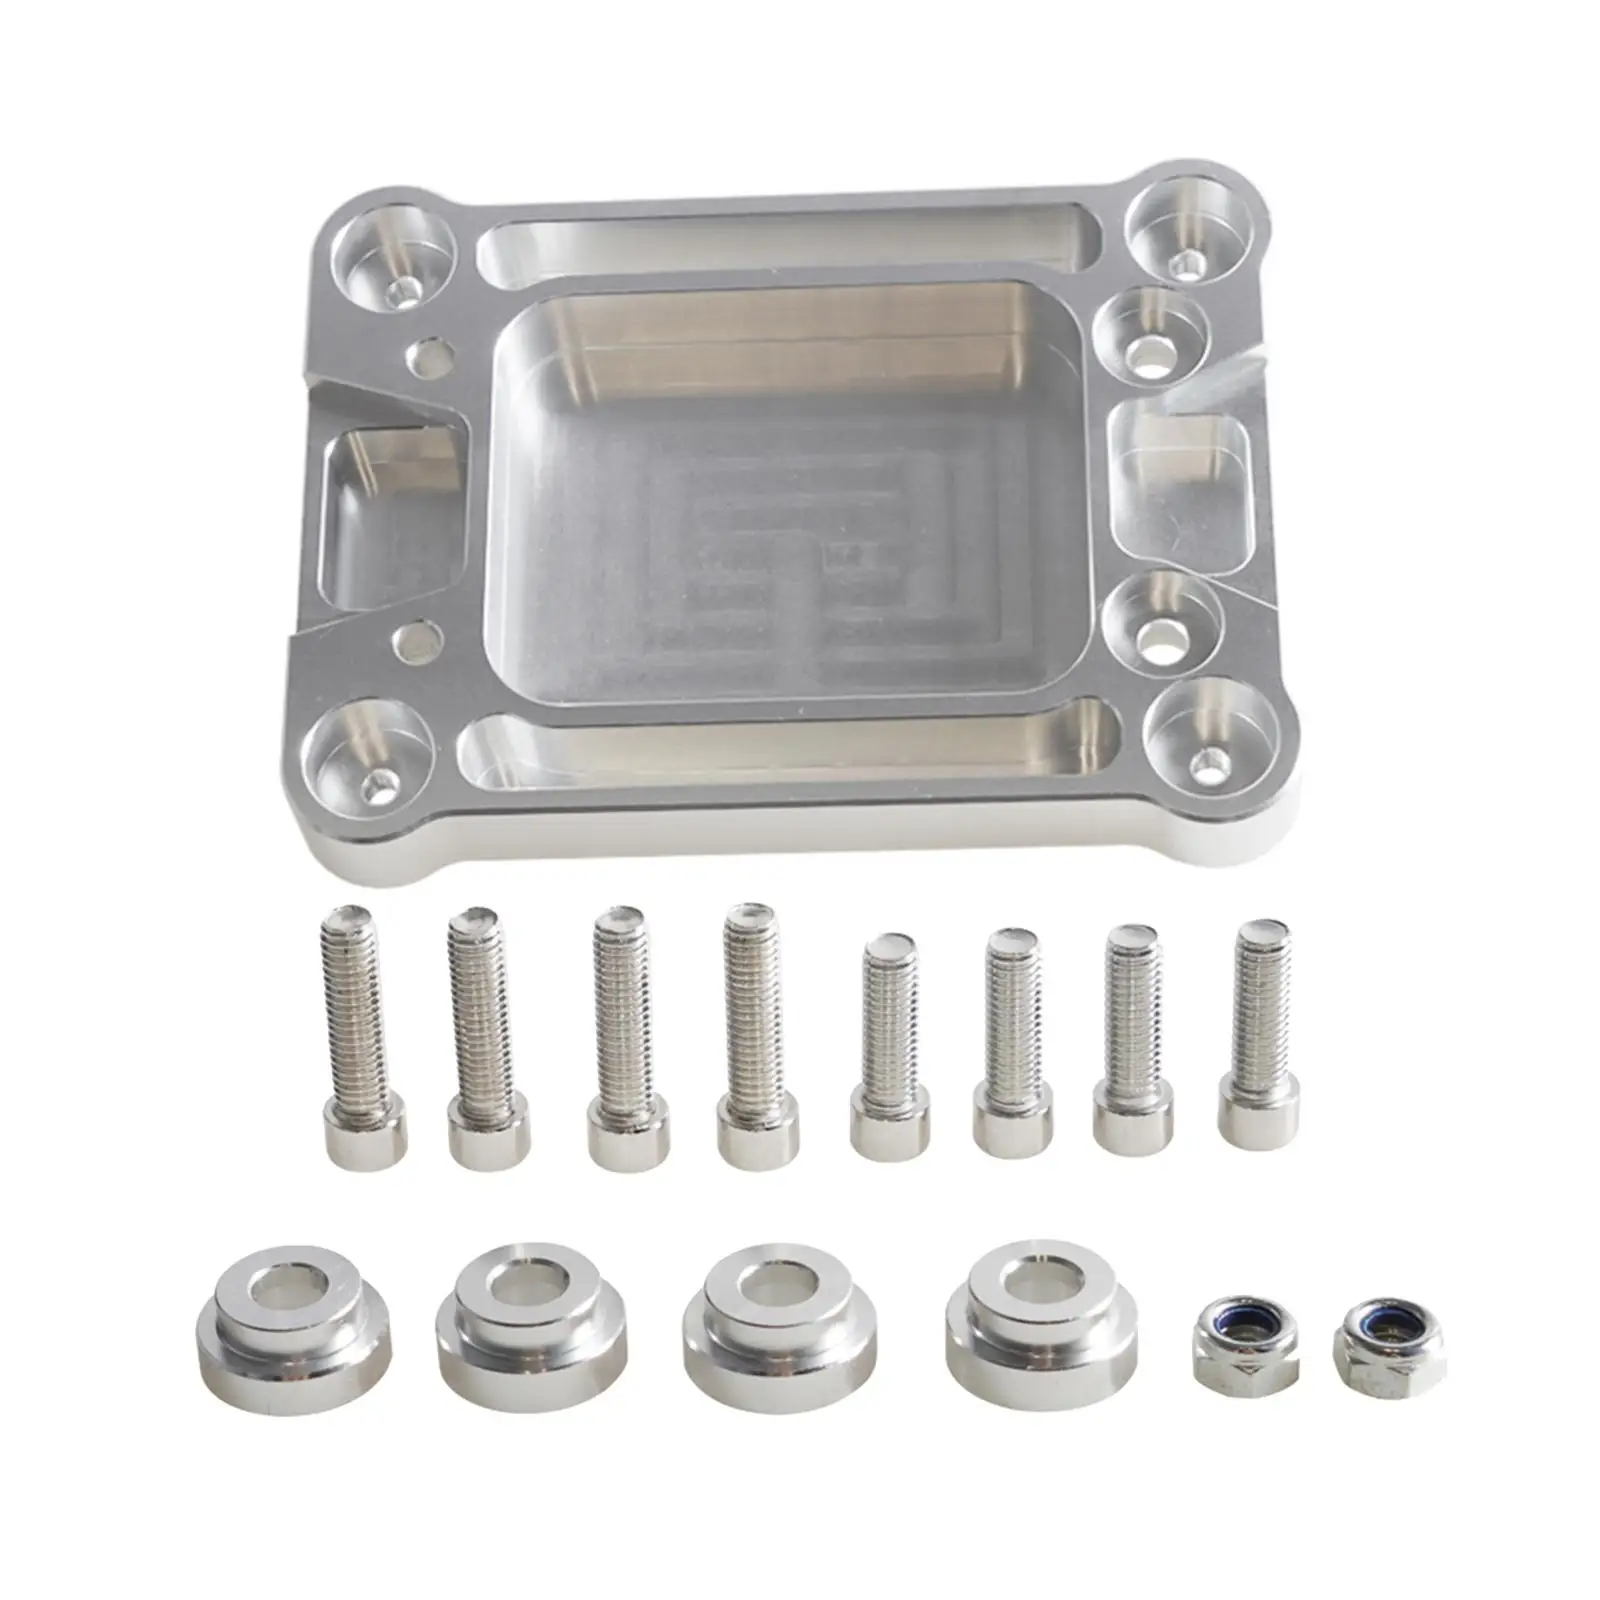 Billet Shifter Box Base Plate Professional for Civic 1988-2000